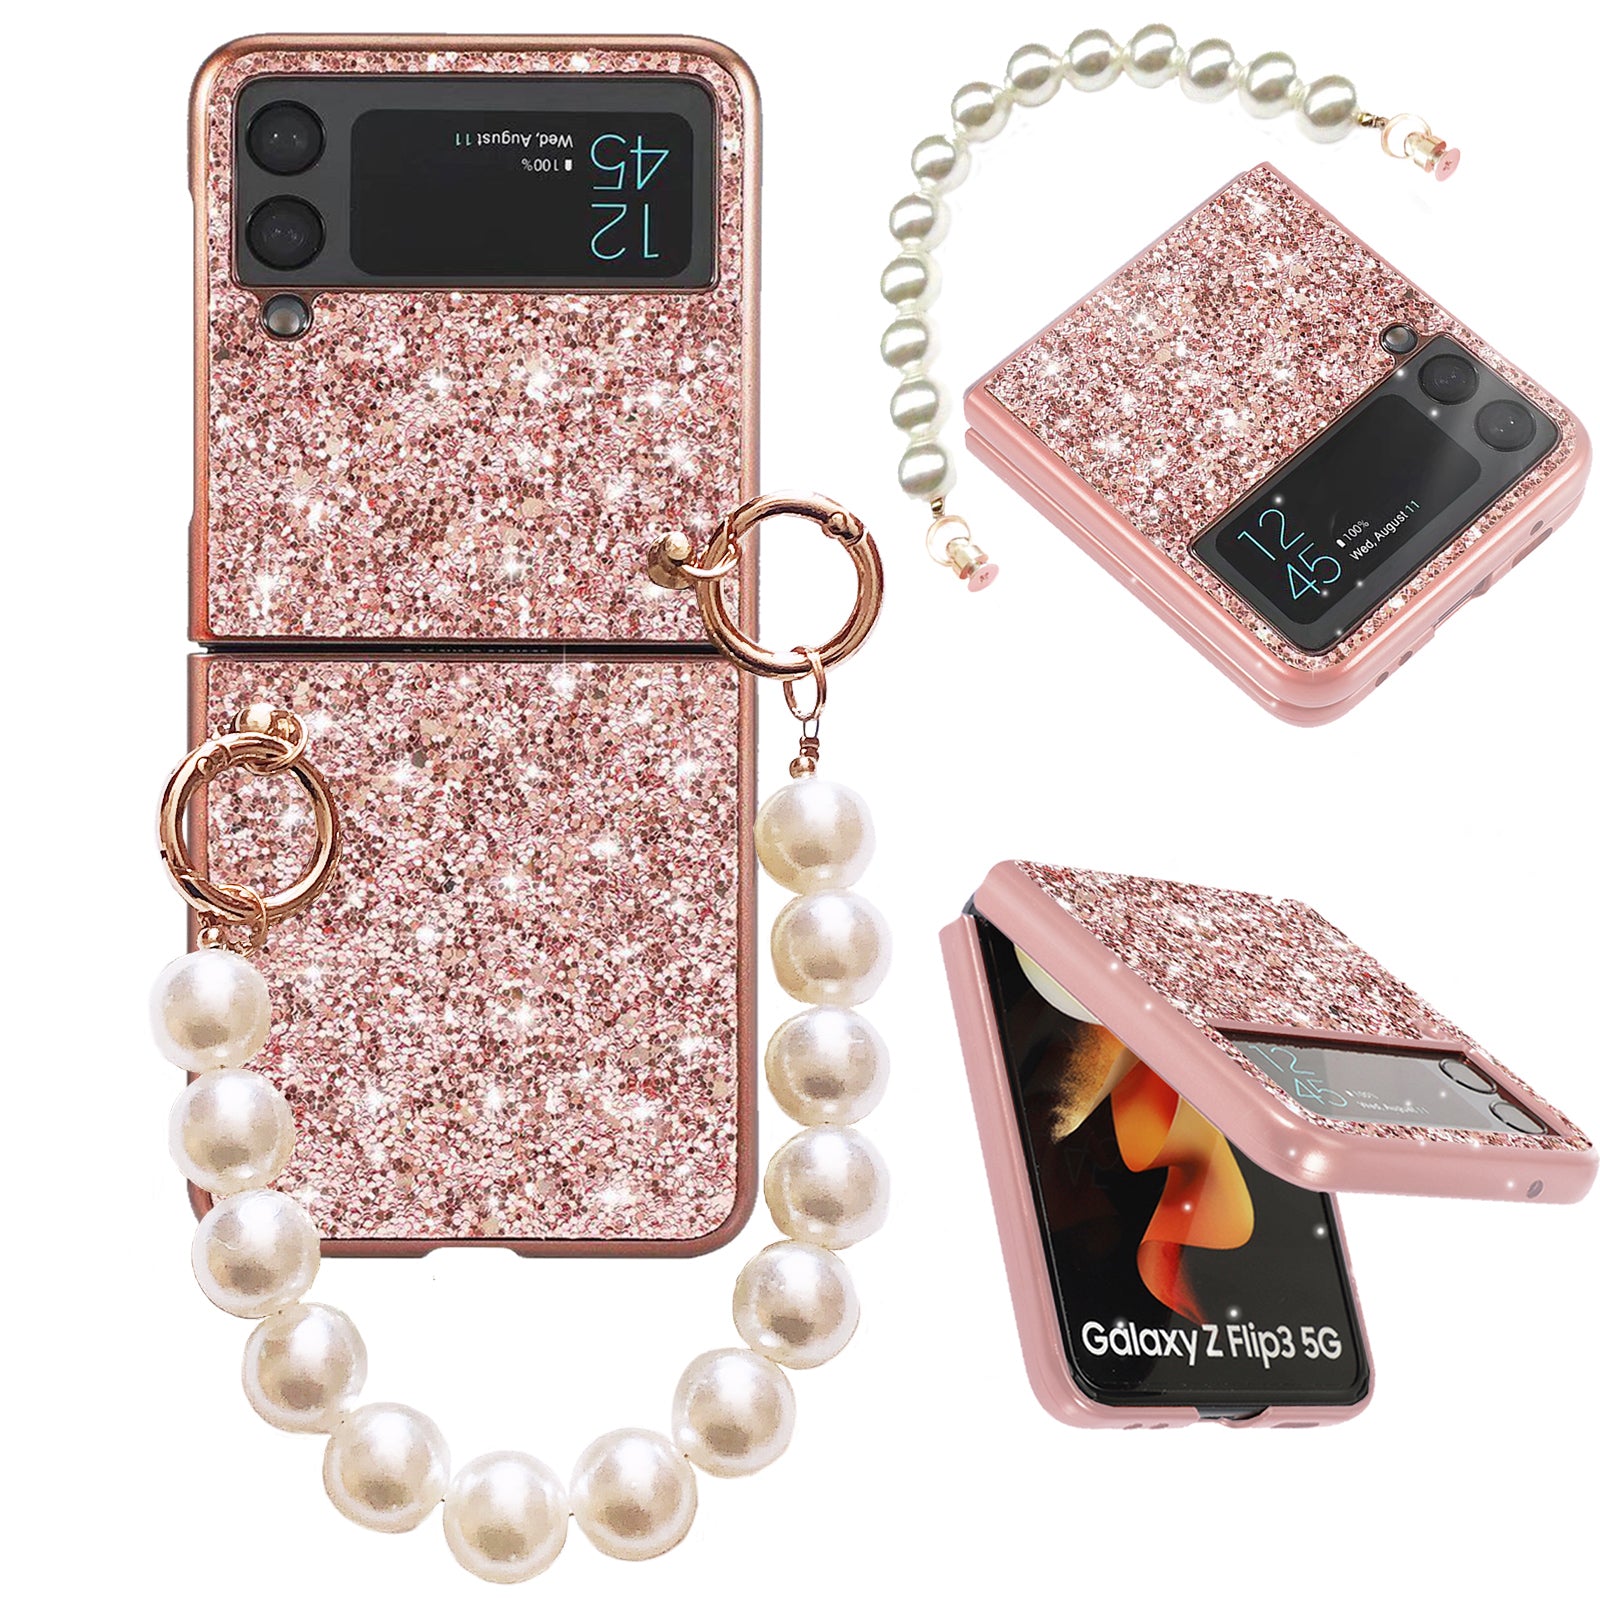 Doe mijn best piano Lounge Glitter Samsung Galaxy Z Flip 3 Case with Bling Bling Cover and Lovely –  MiitoomoStore